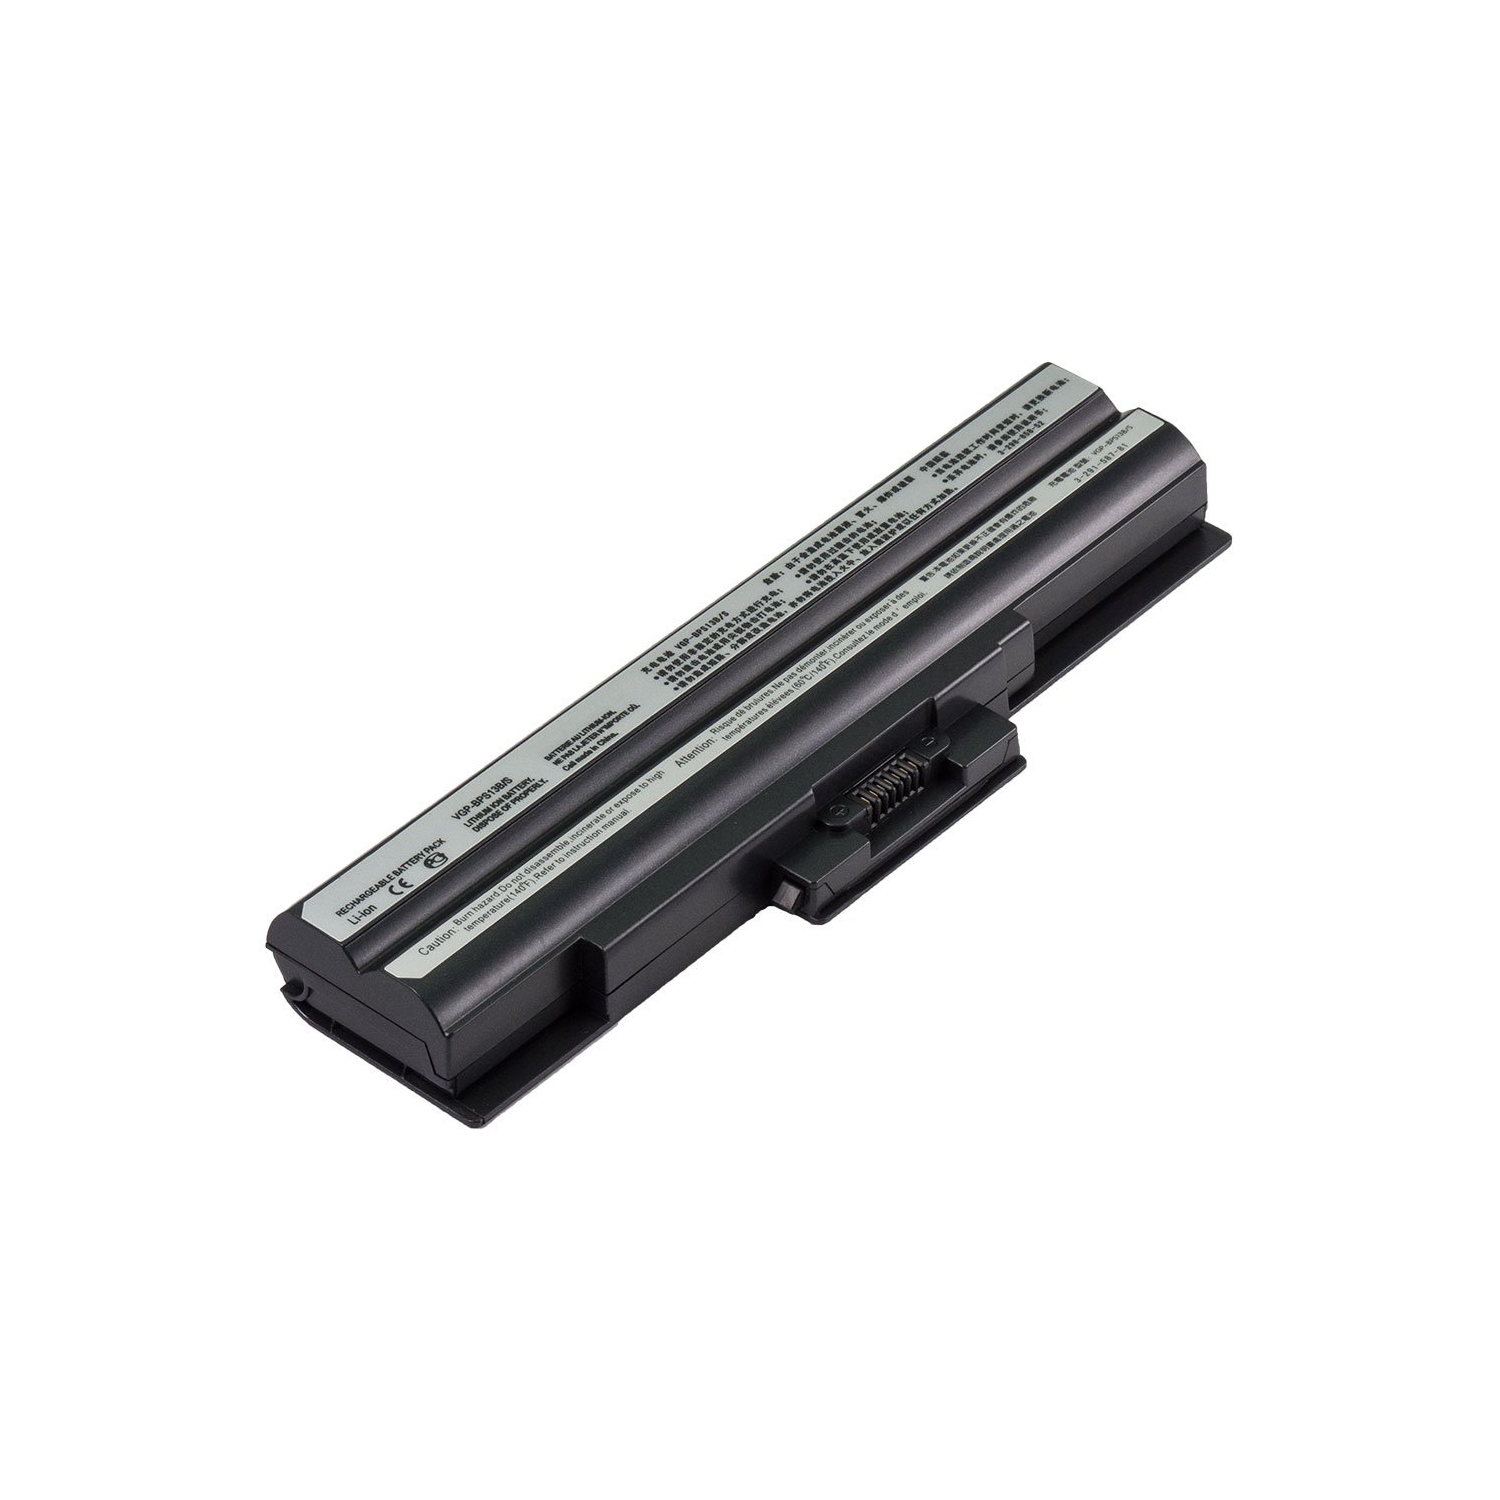 Laptop Battery Replacement for Sony VAIO VGN-AW180Y/Q, VGP-BPS13, VGP-BPS13/S, VGP-BPS13A/Q, VGP-BPS13B/B, VGP-BSP13/S